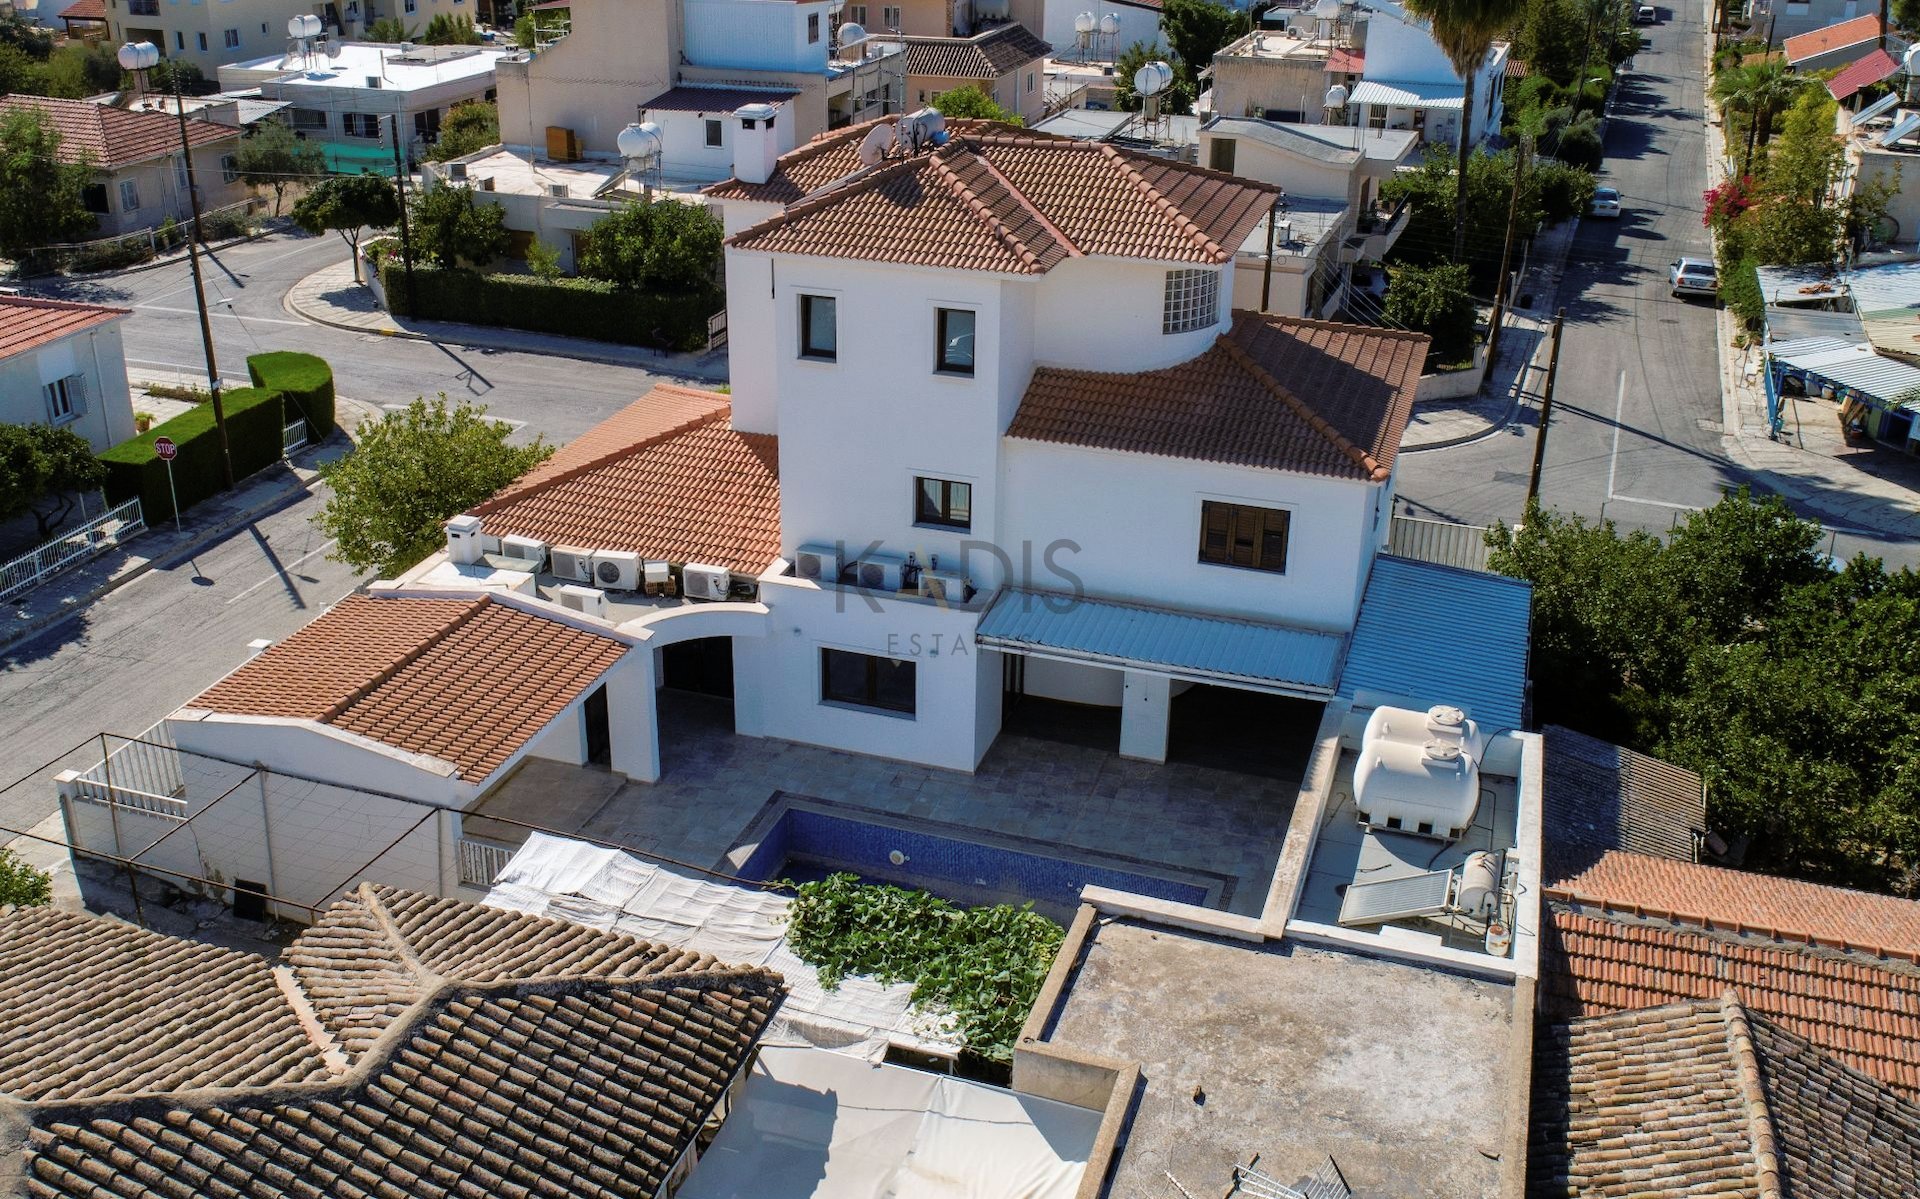 4 Bedroom House for Sale in Agios Dometios, Nicosia District